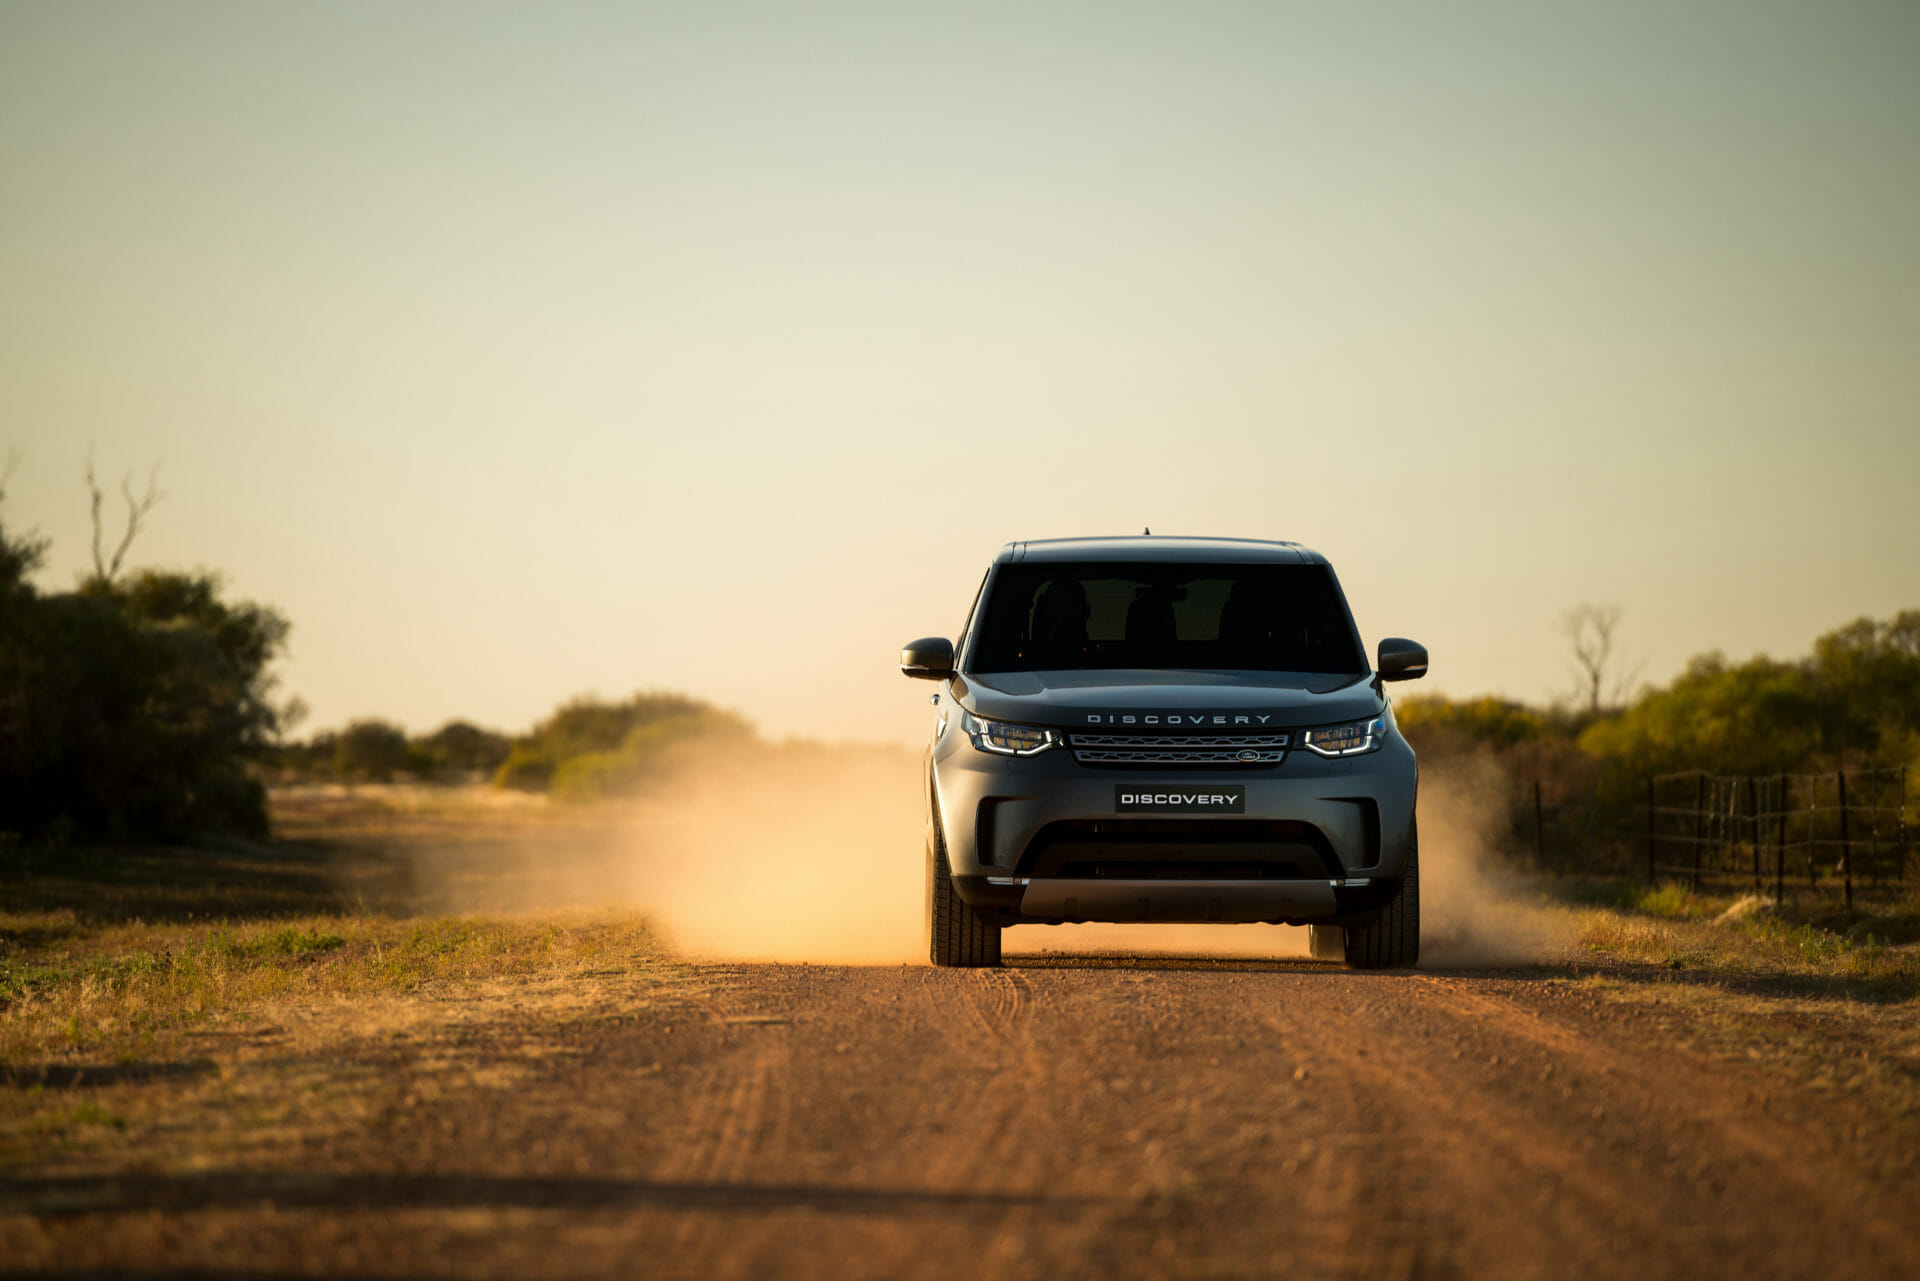 2018 Land Rover Discovery on a Dirt Road Photo By Land Rover (1)